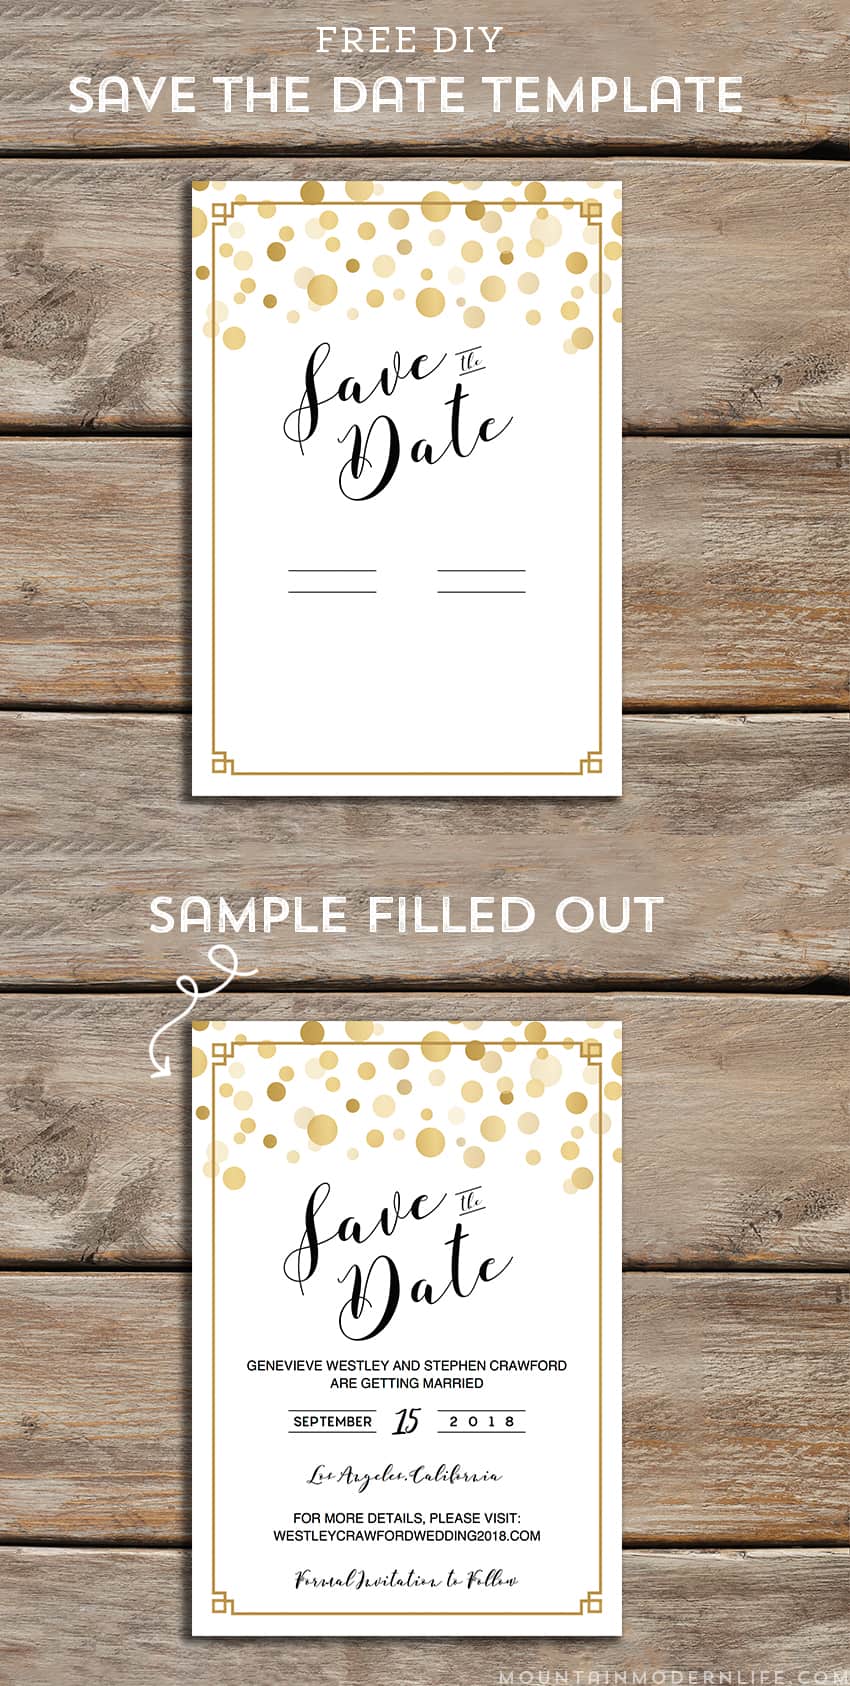 Download and customize this FREE Gold Modern DIY save the date template and then print as many copies as you need! MoutainModernLife.com